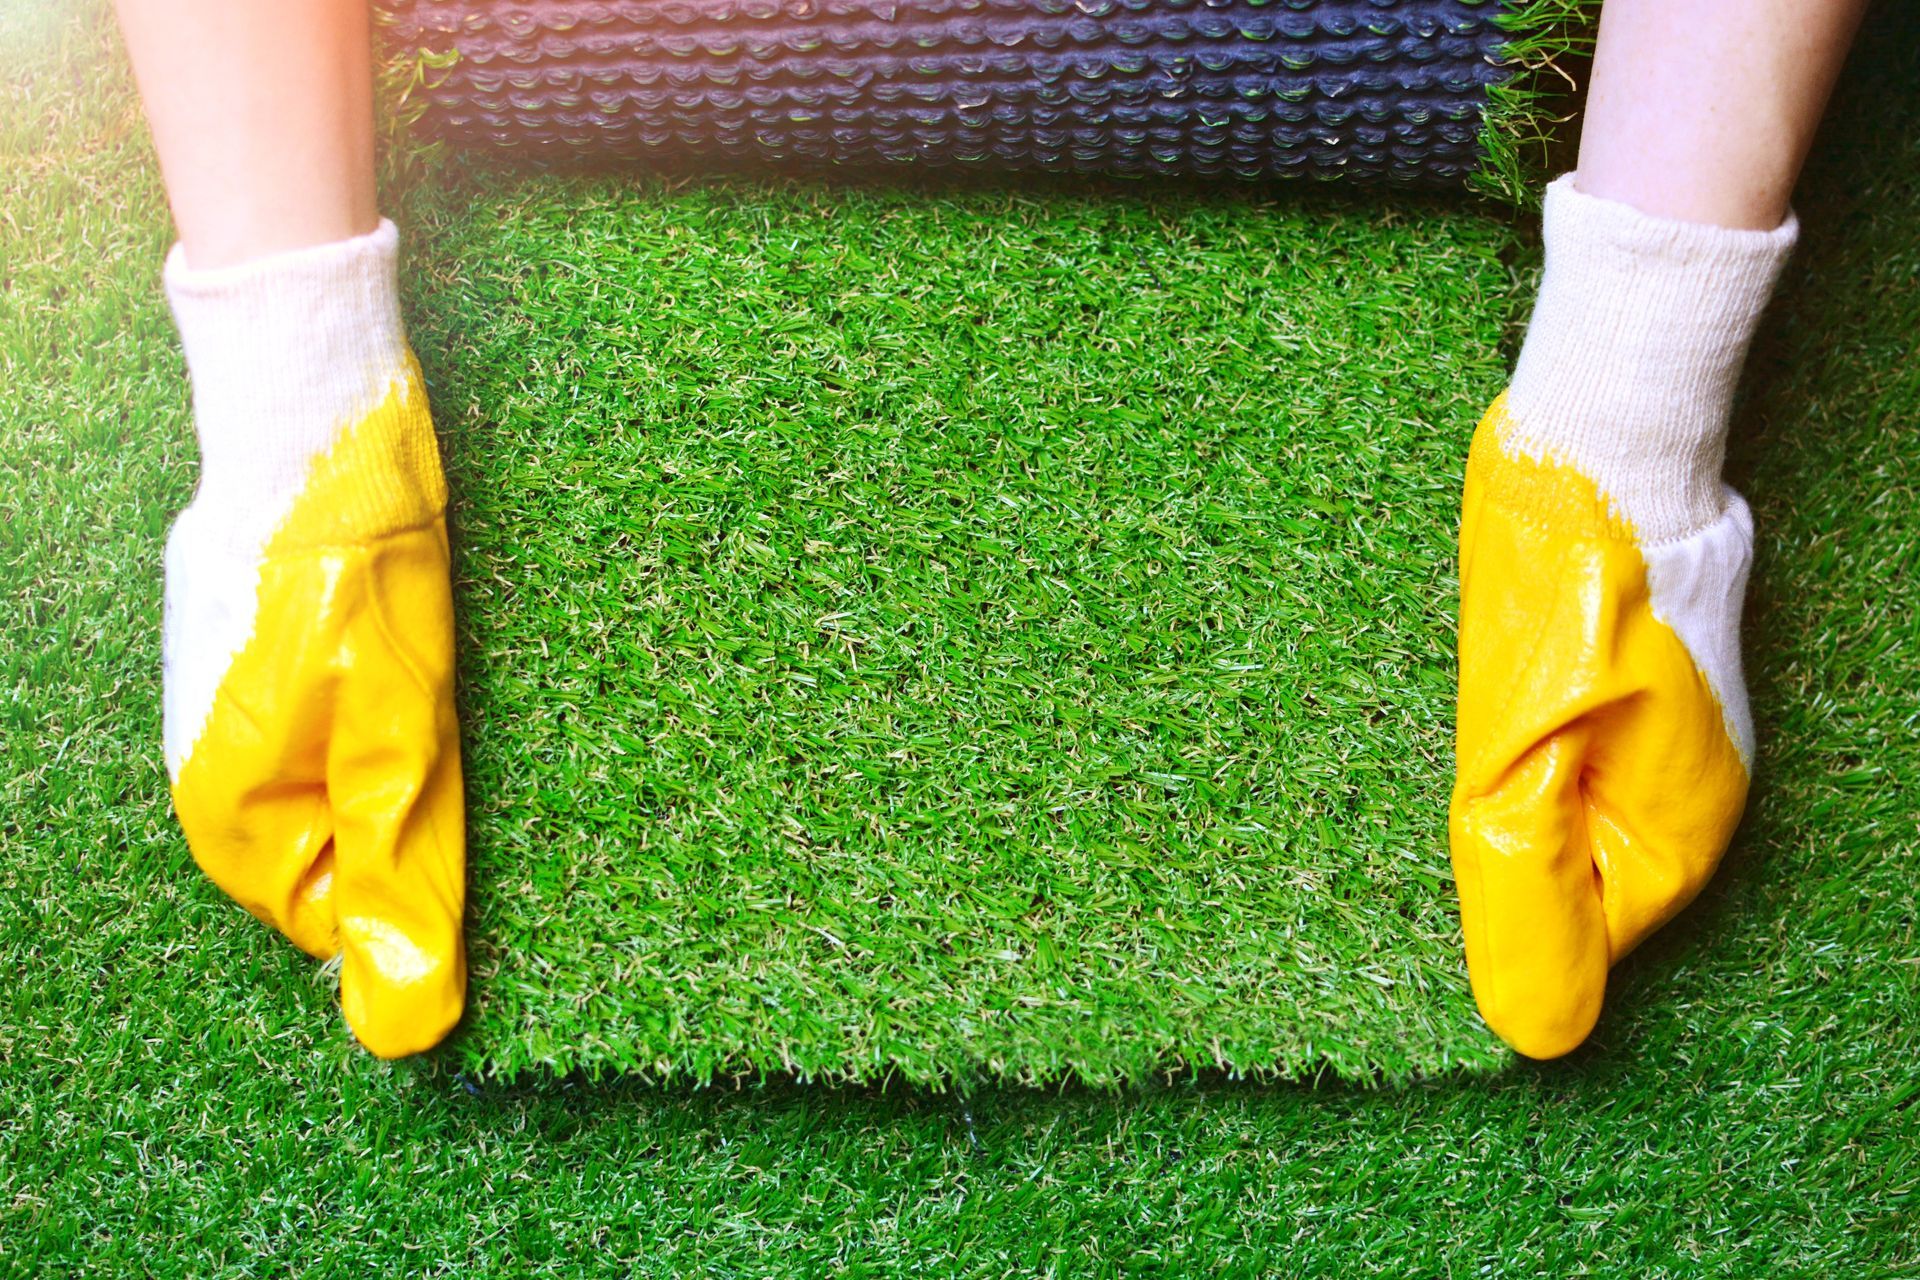 Close-up view of synthetic artificial grass material, showcasing its texture and vibrant green fibers.